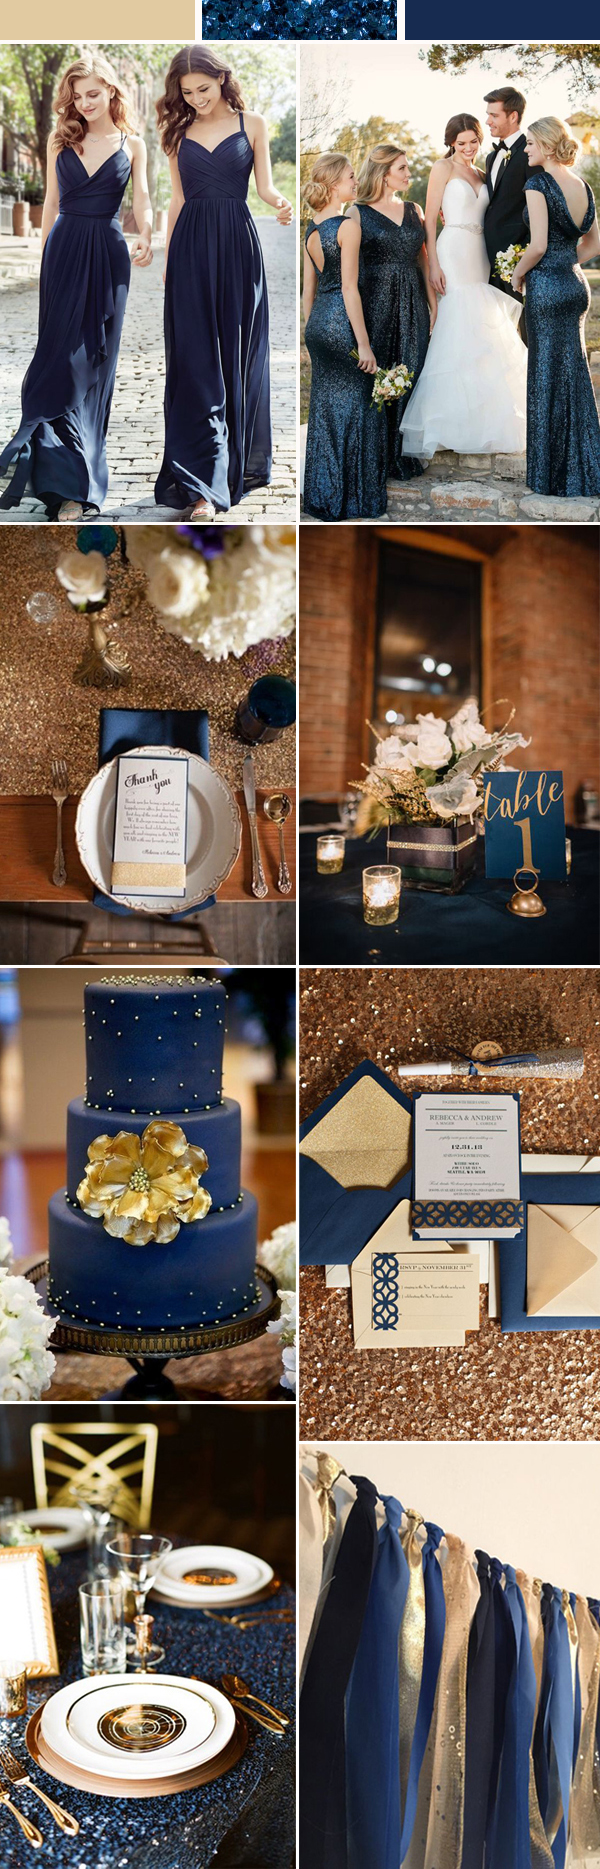 gold and navy blue wedding color ideas